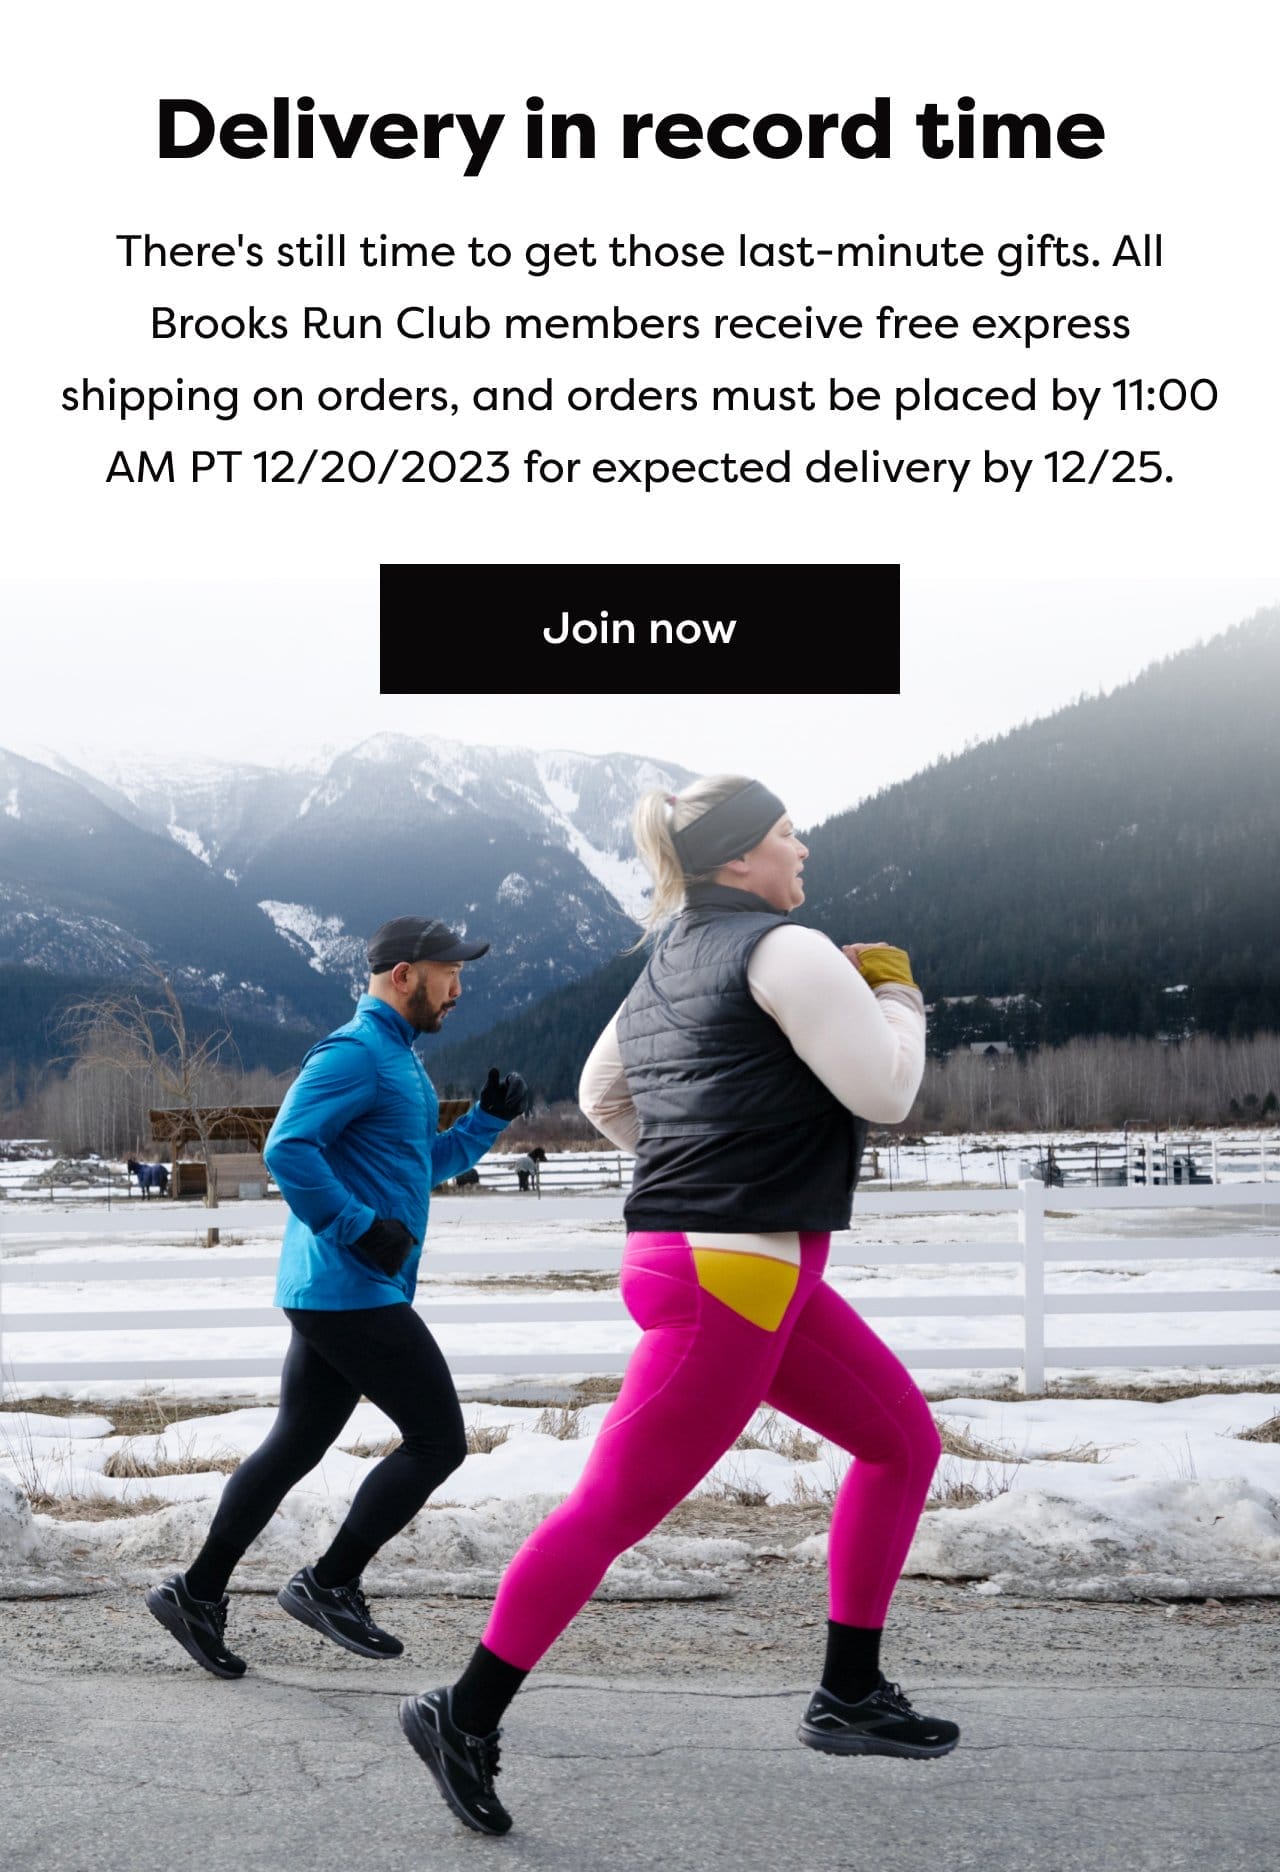 Delivery in record time - There's still time to get those last-minute gifts. All Brooks Run Club members receive free express shipping on orders, and orders must be placed by 11:00AM PT 12/20/2023 for expected delivery by 12/25. - Join now